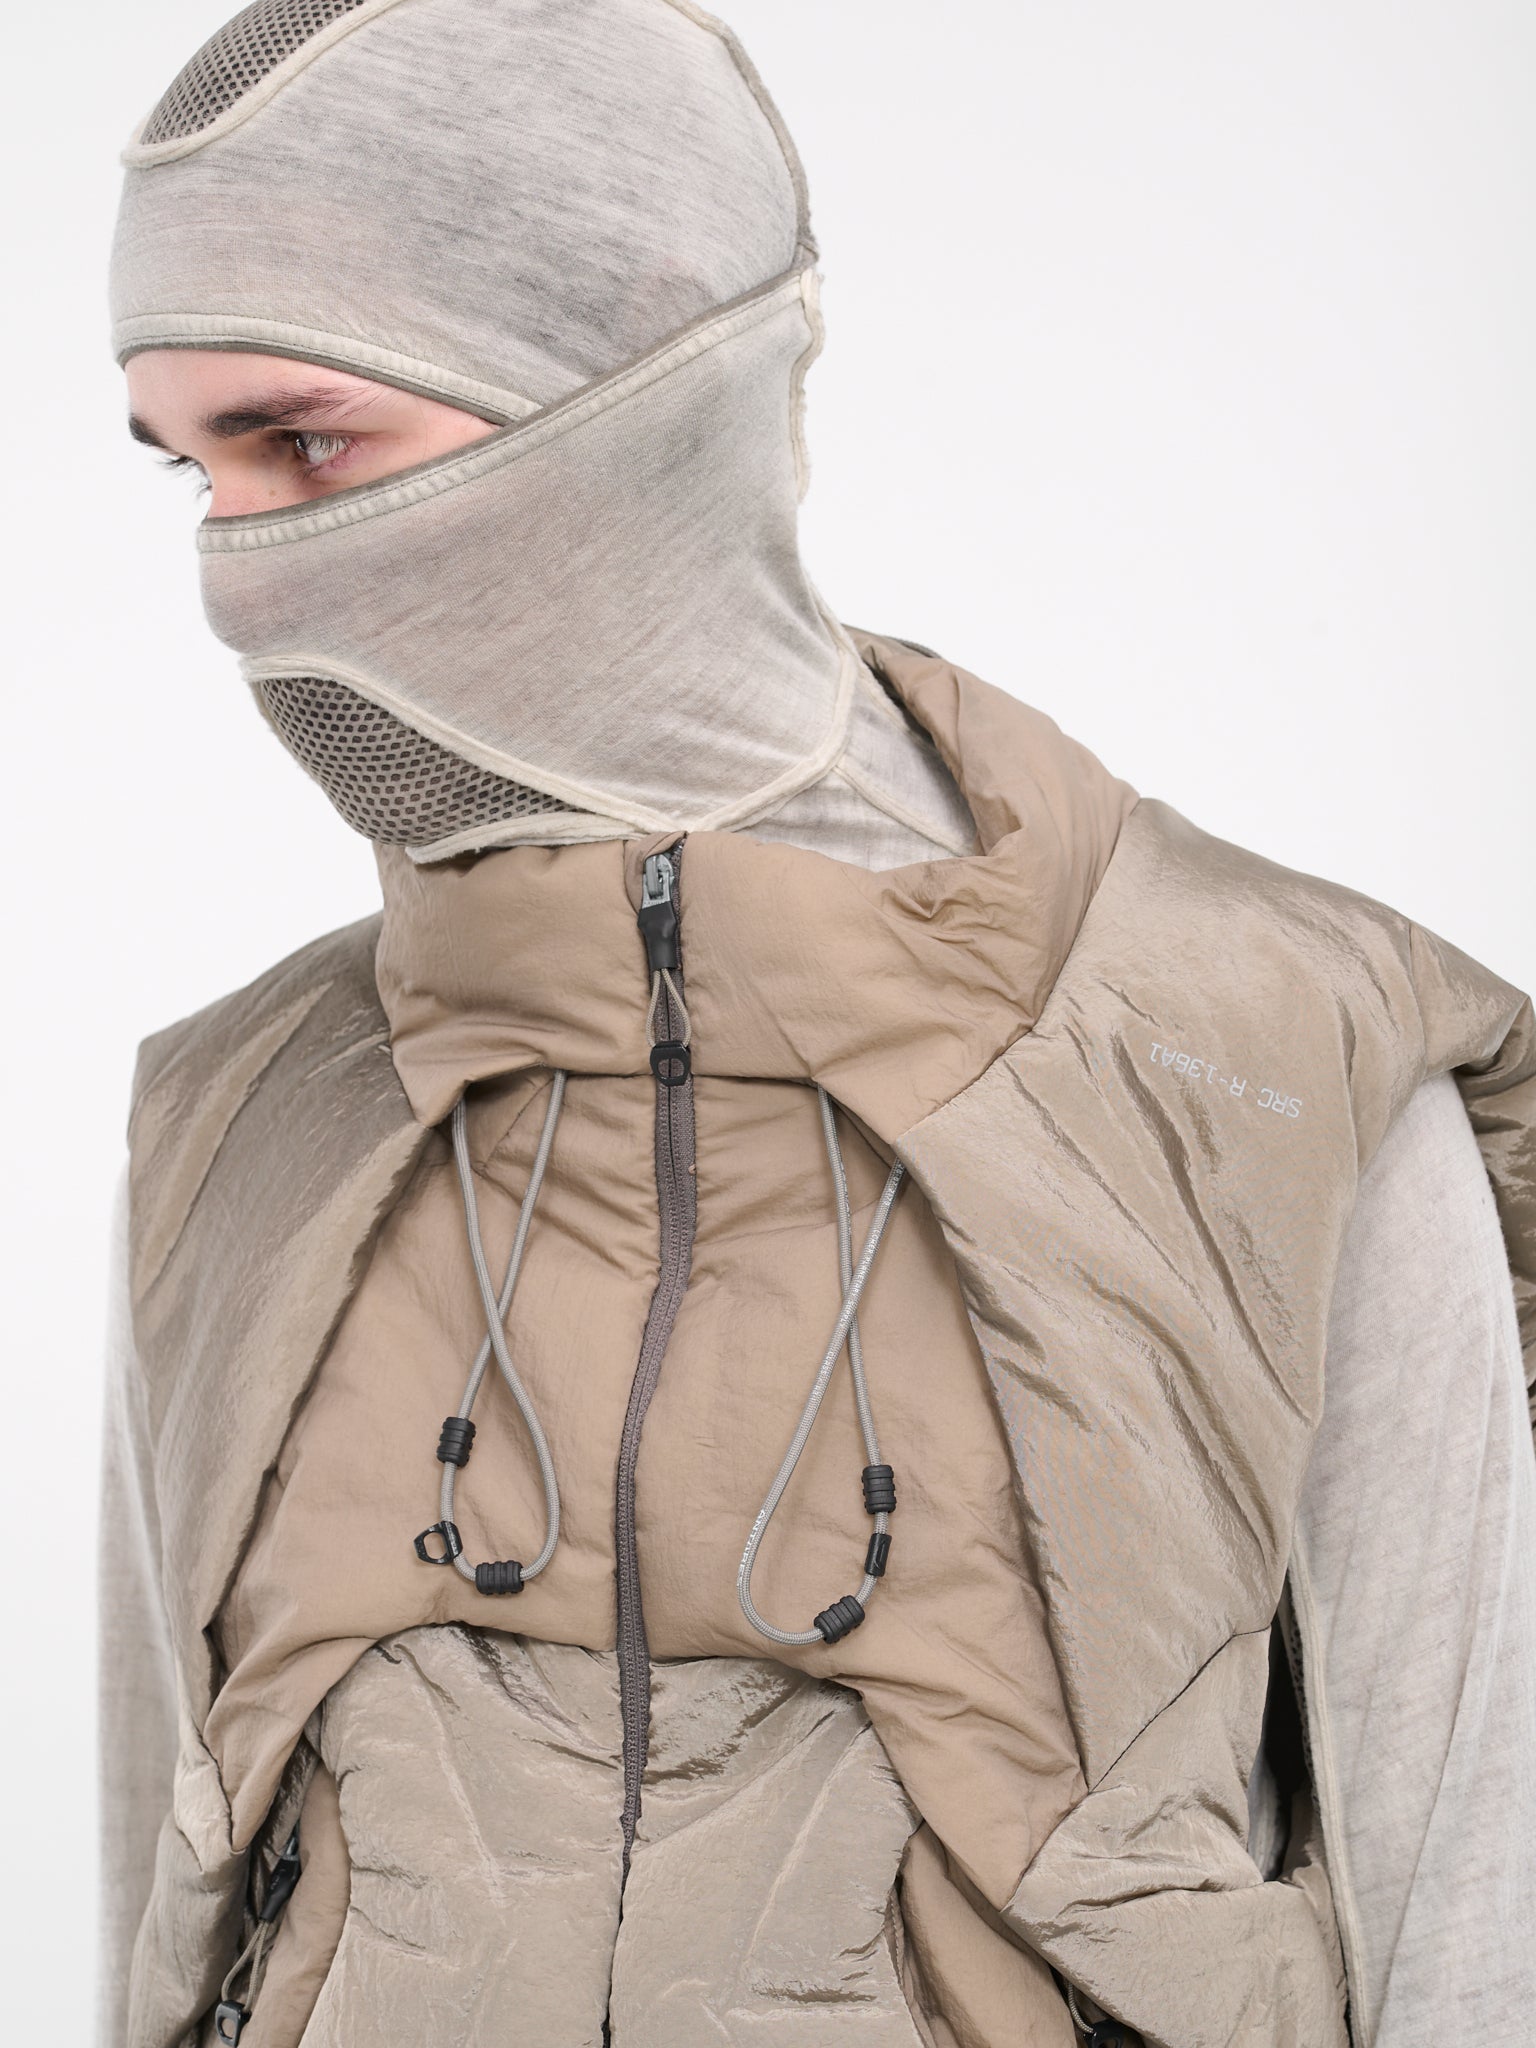 'Scars' Overlapping Tactical Vest (HM02923-1-GG-LIGHT-BROWN)